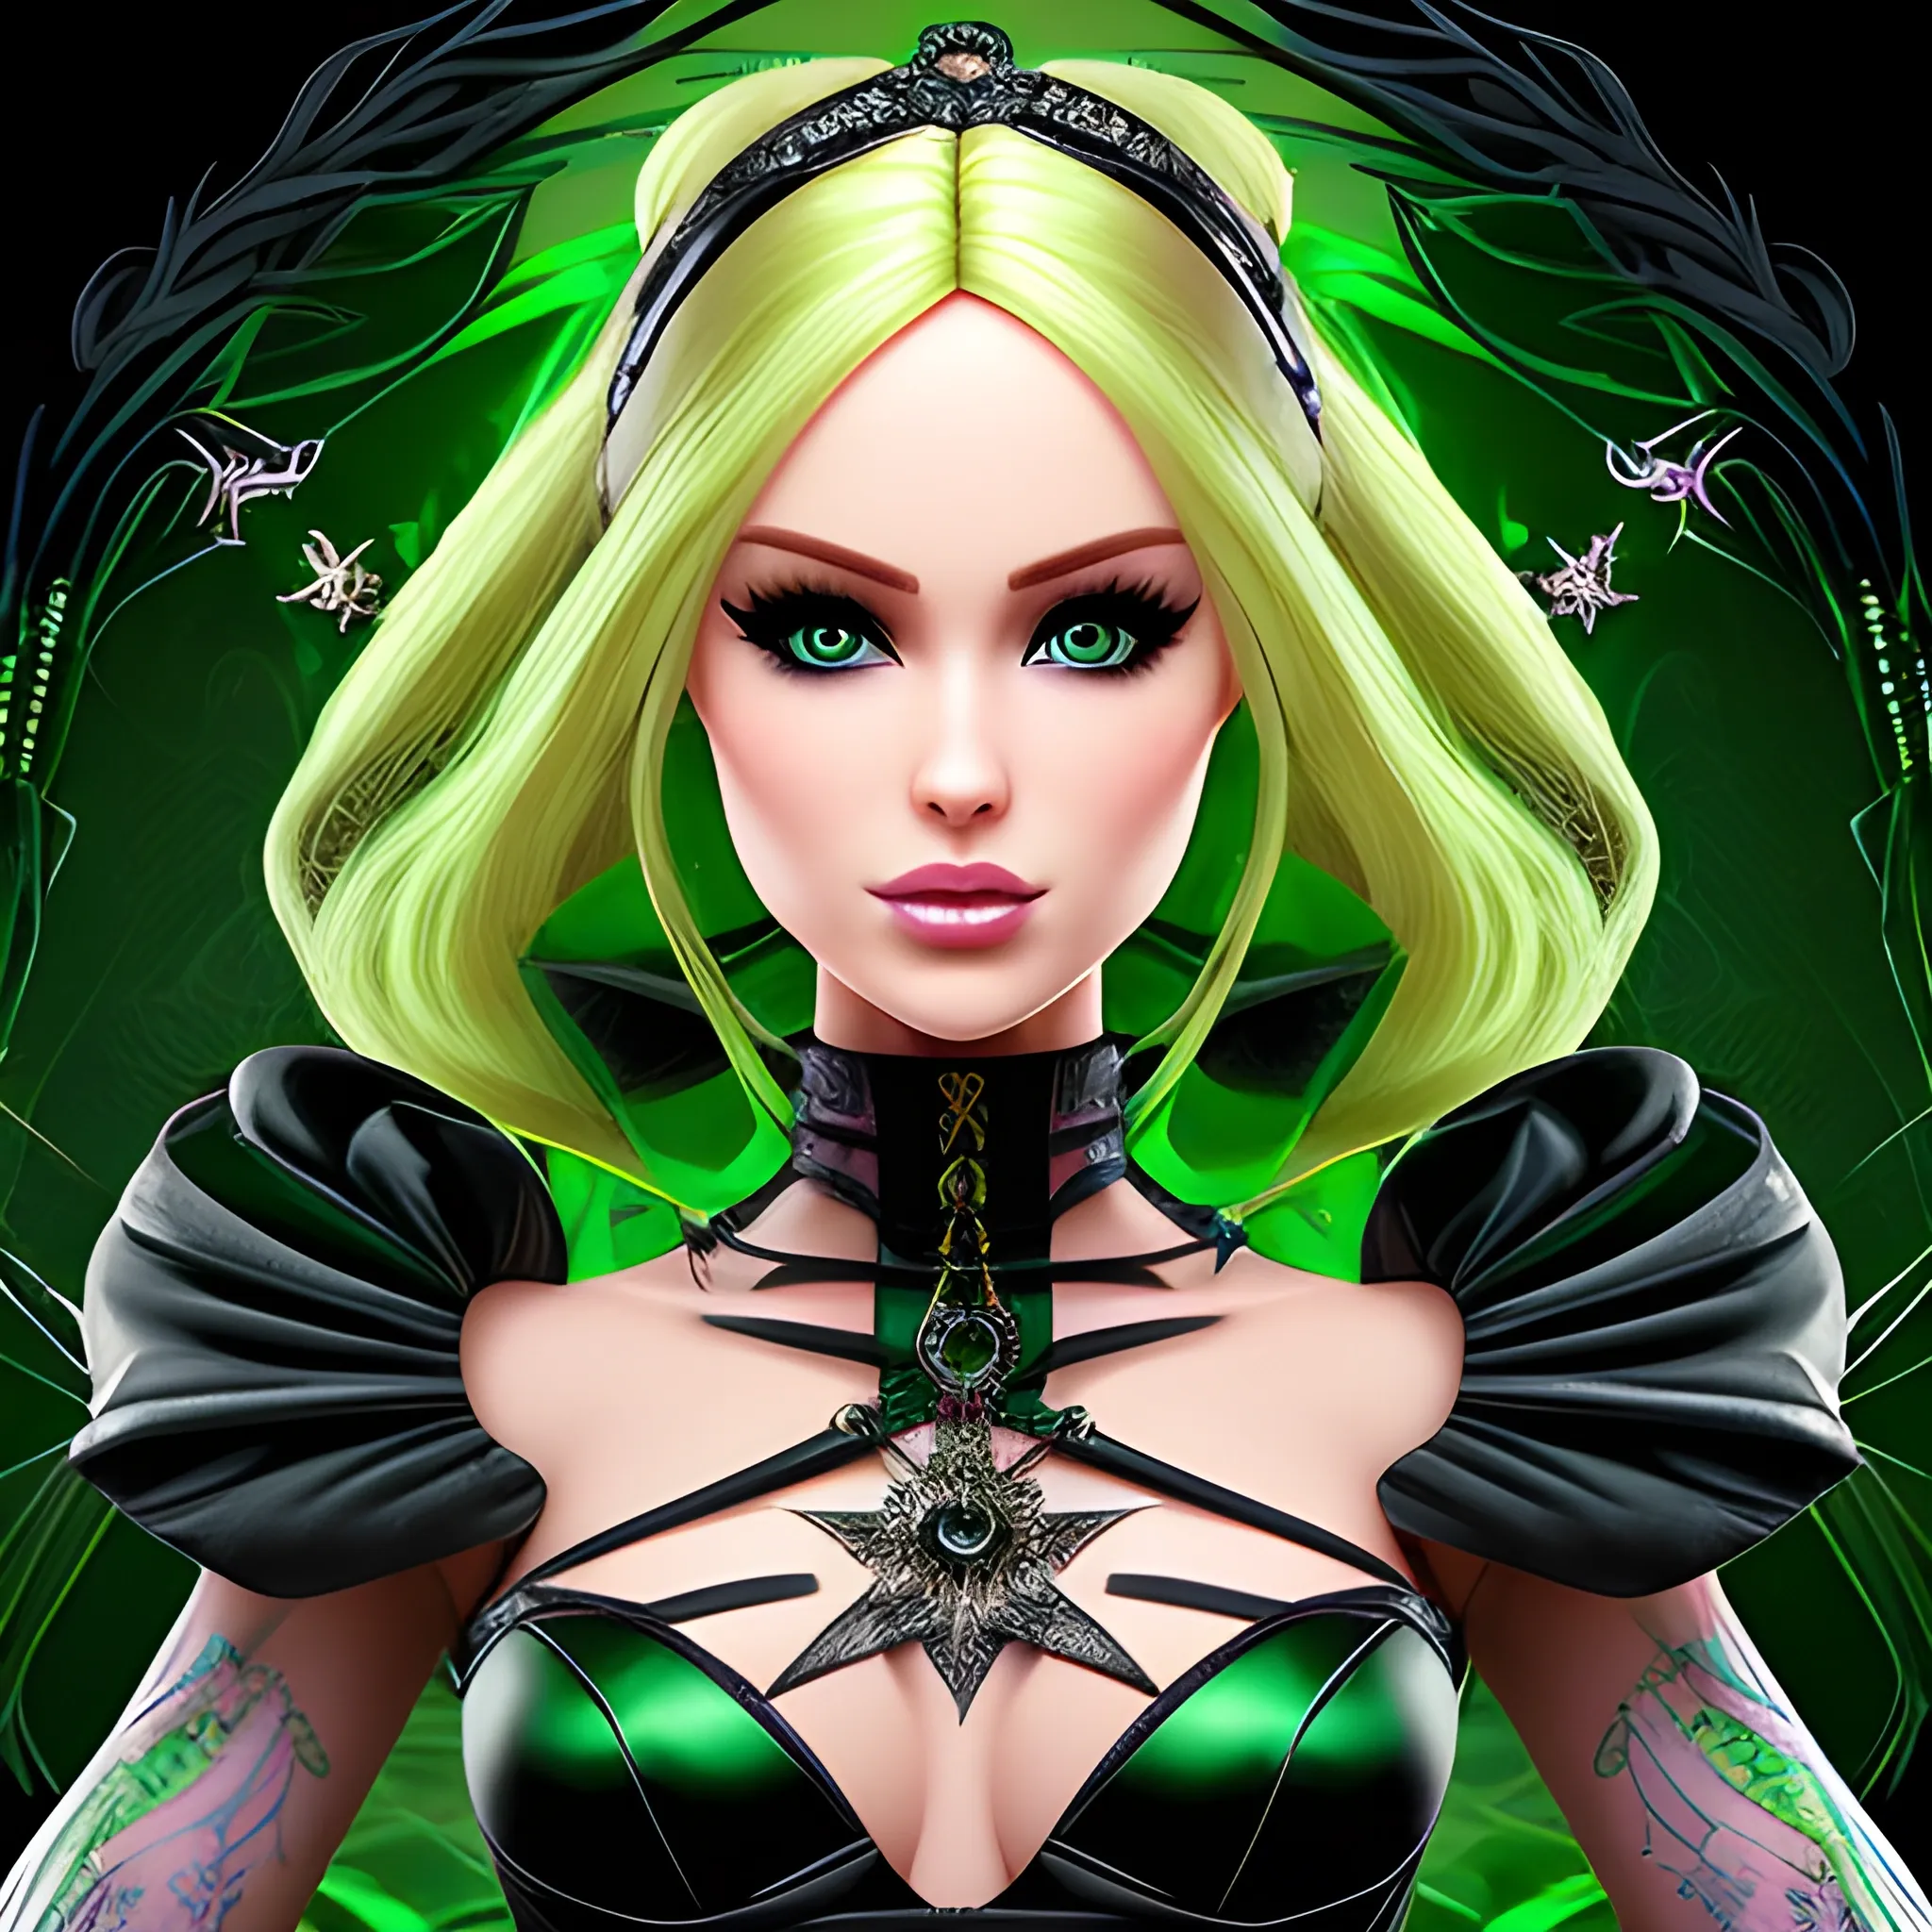 A hyper detailed, gaming style portrait of a beautiful woman, with beautiful barbie face, who is a character in a game about magical adventures, witches and magicians, with blondie hair, wearing a fantasy style dark green and black wear, wrapped in black lines with beautiful dynamic background